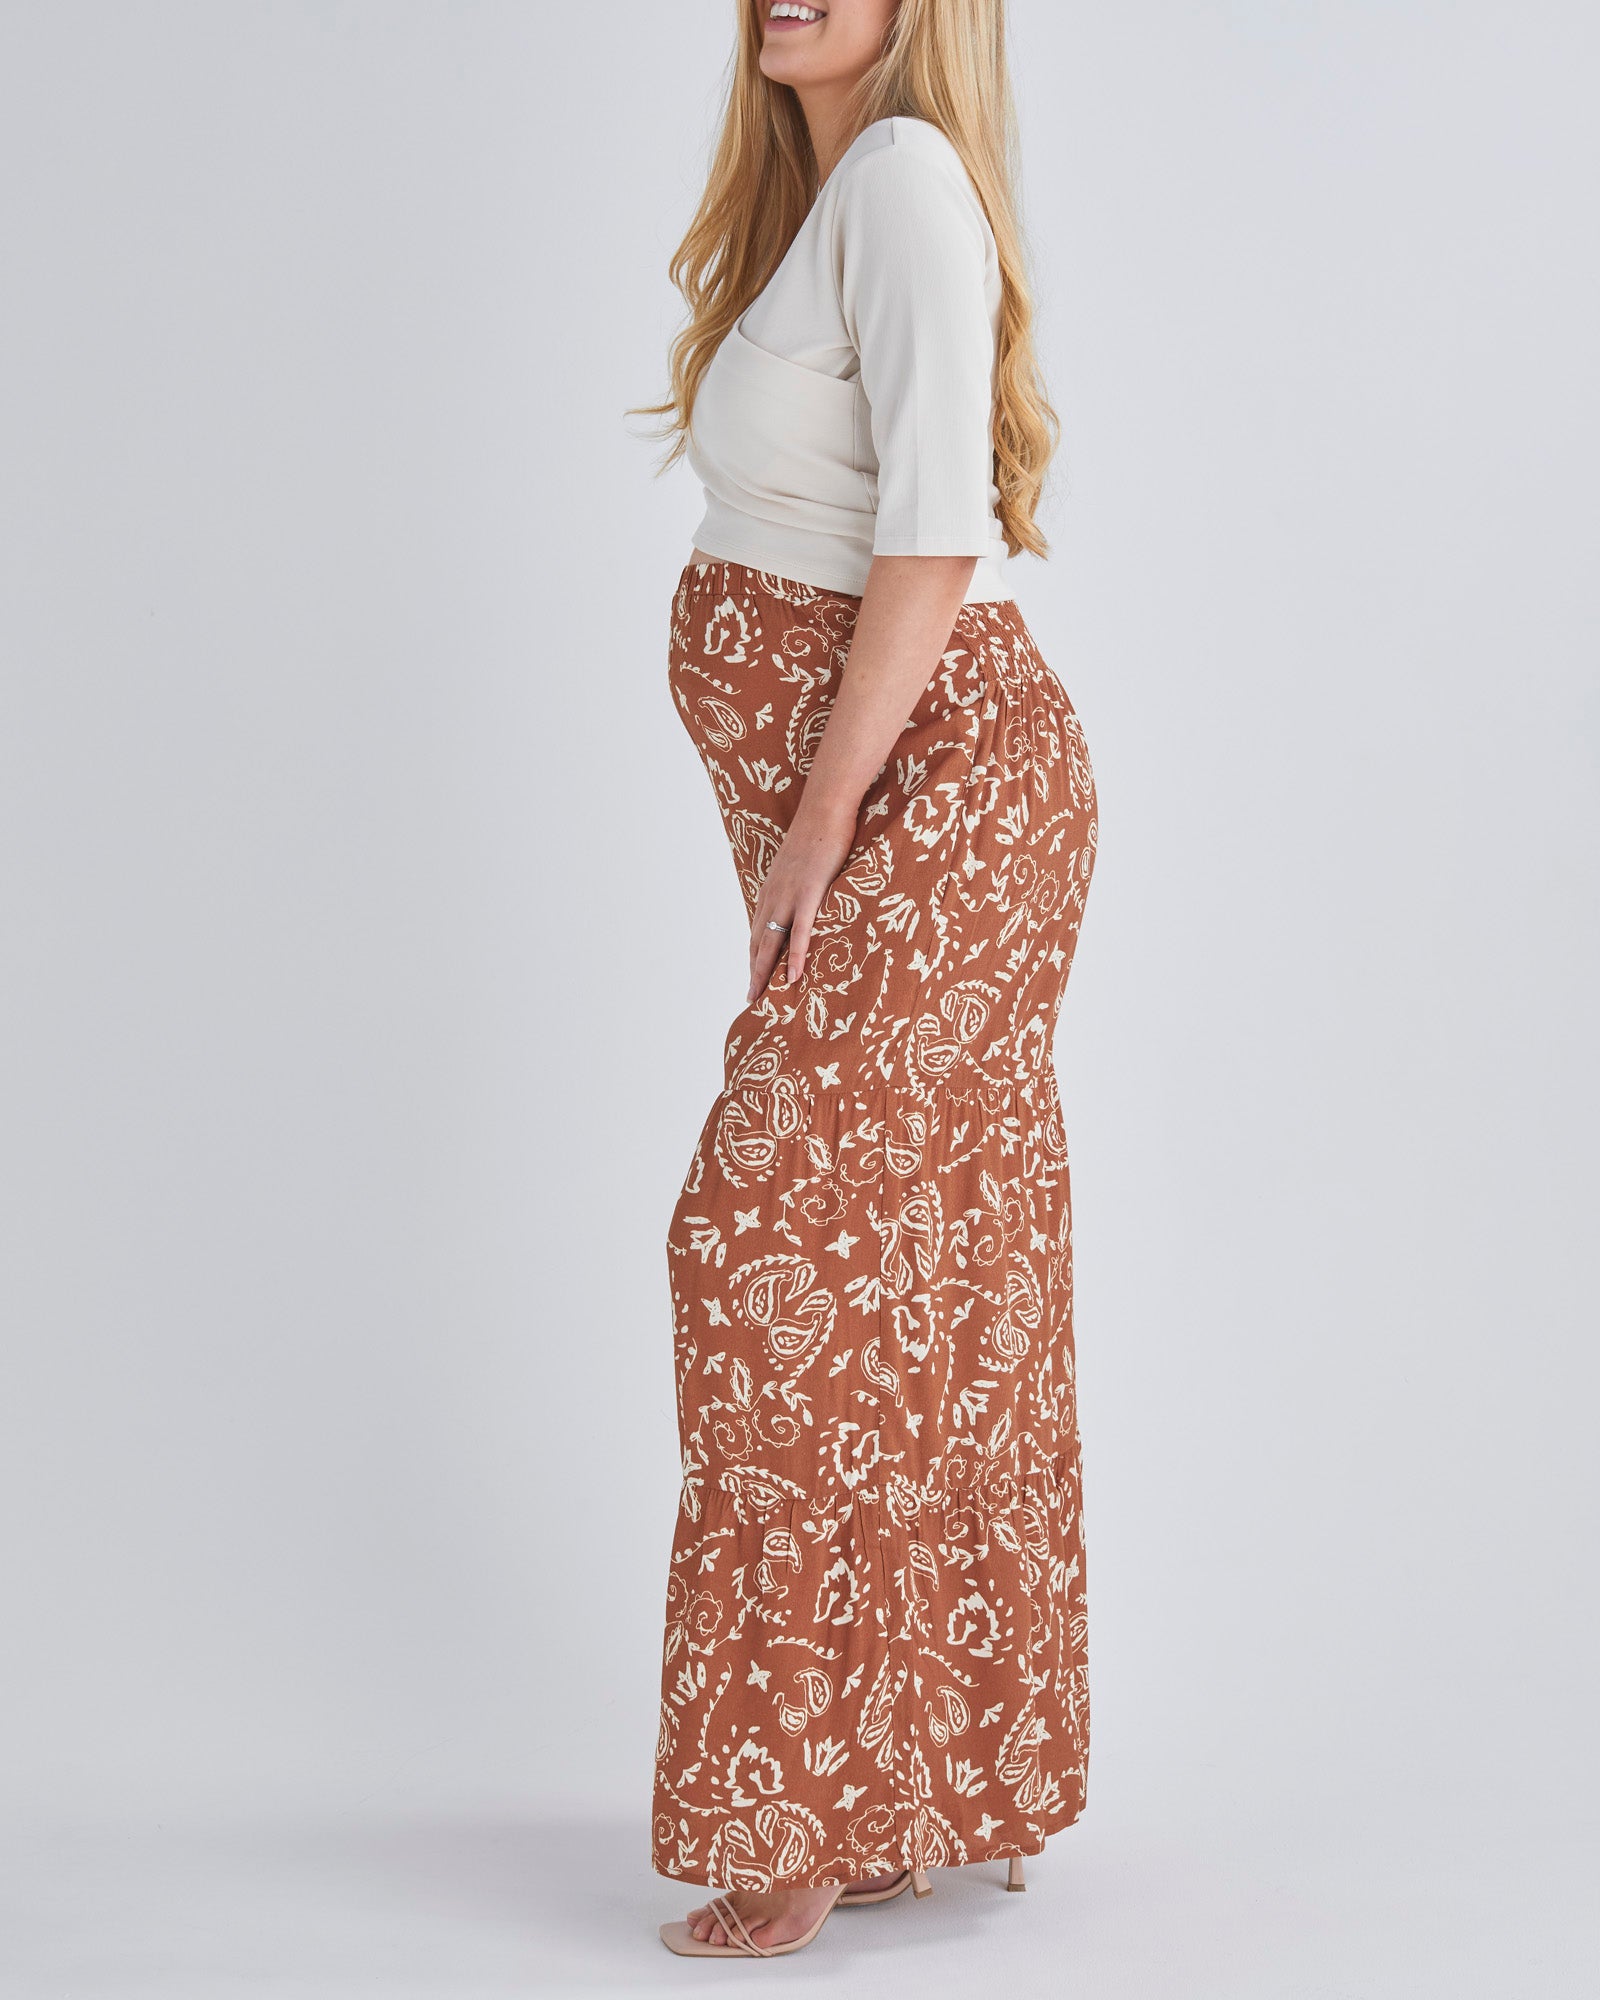 Side View - A Pregnant Woman Wearing Stacie Wide Leg Maternity Ruffled Pants in Paisley Print from Angel Maternity